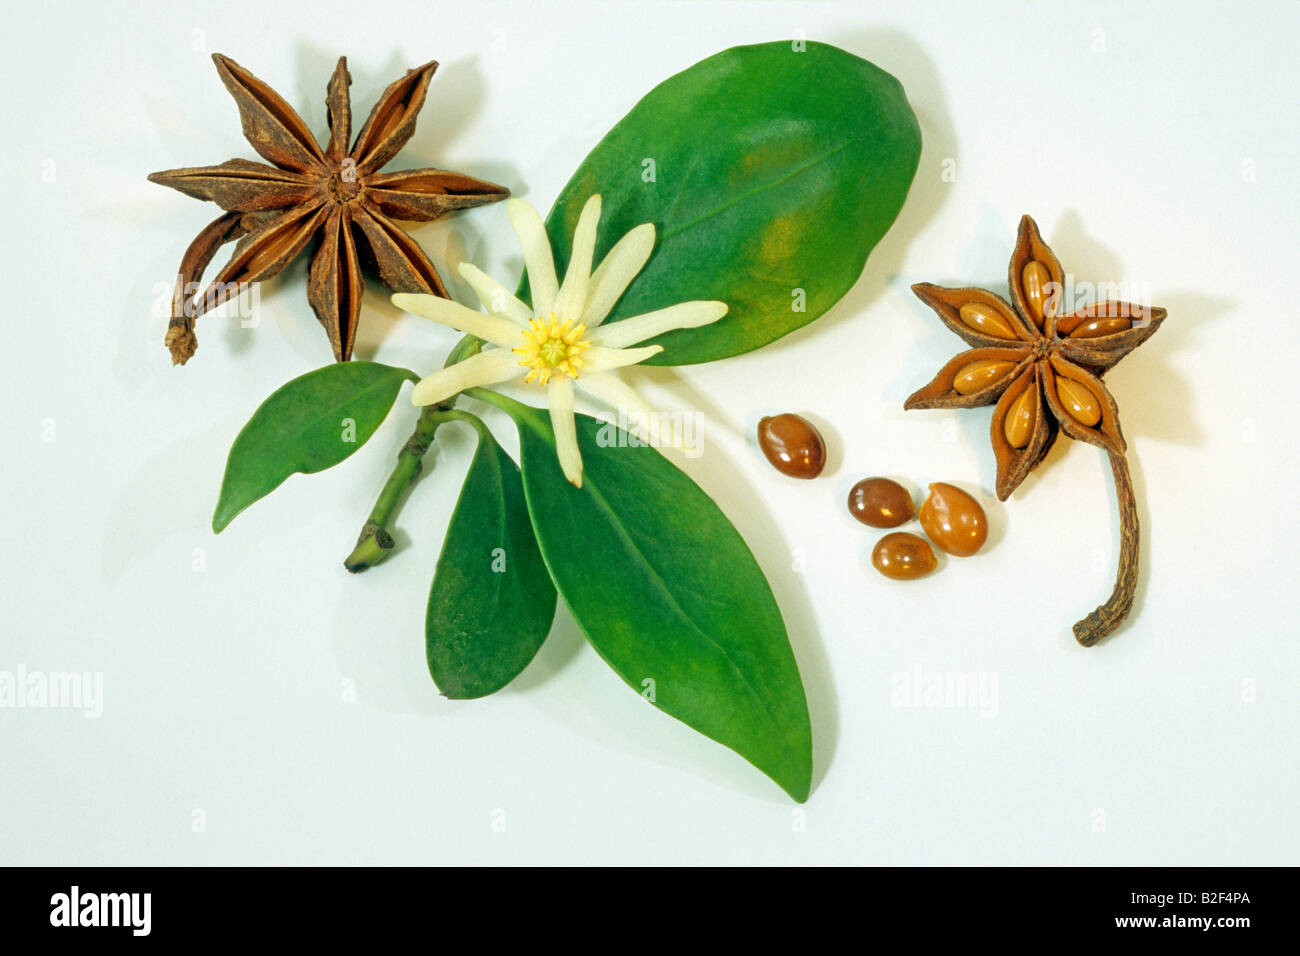 Aniseed Tree, Star Anise (Illicium verum), leaves, flower and seeds, studio picture Stock Photo